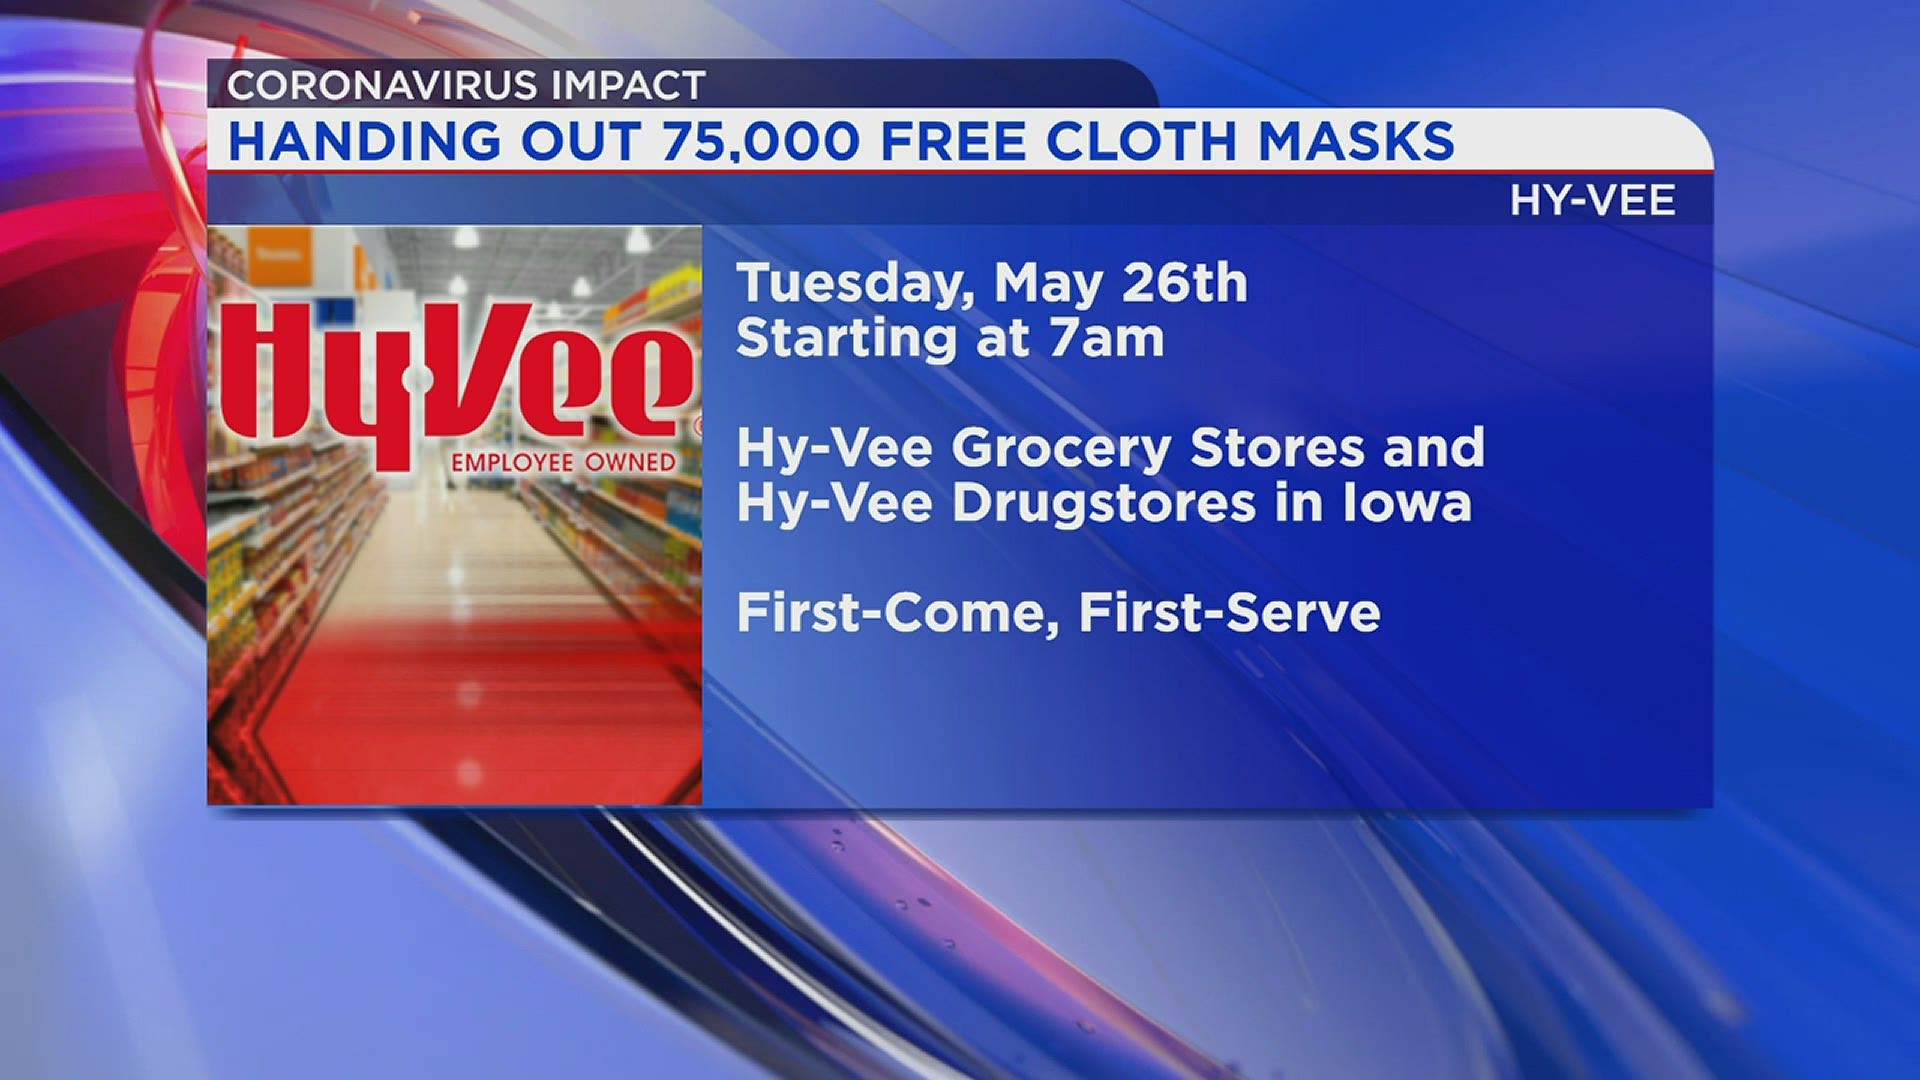 The Iowa Department of Public Health gave Hy-Vee 75,000 masks to hand out.